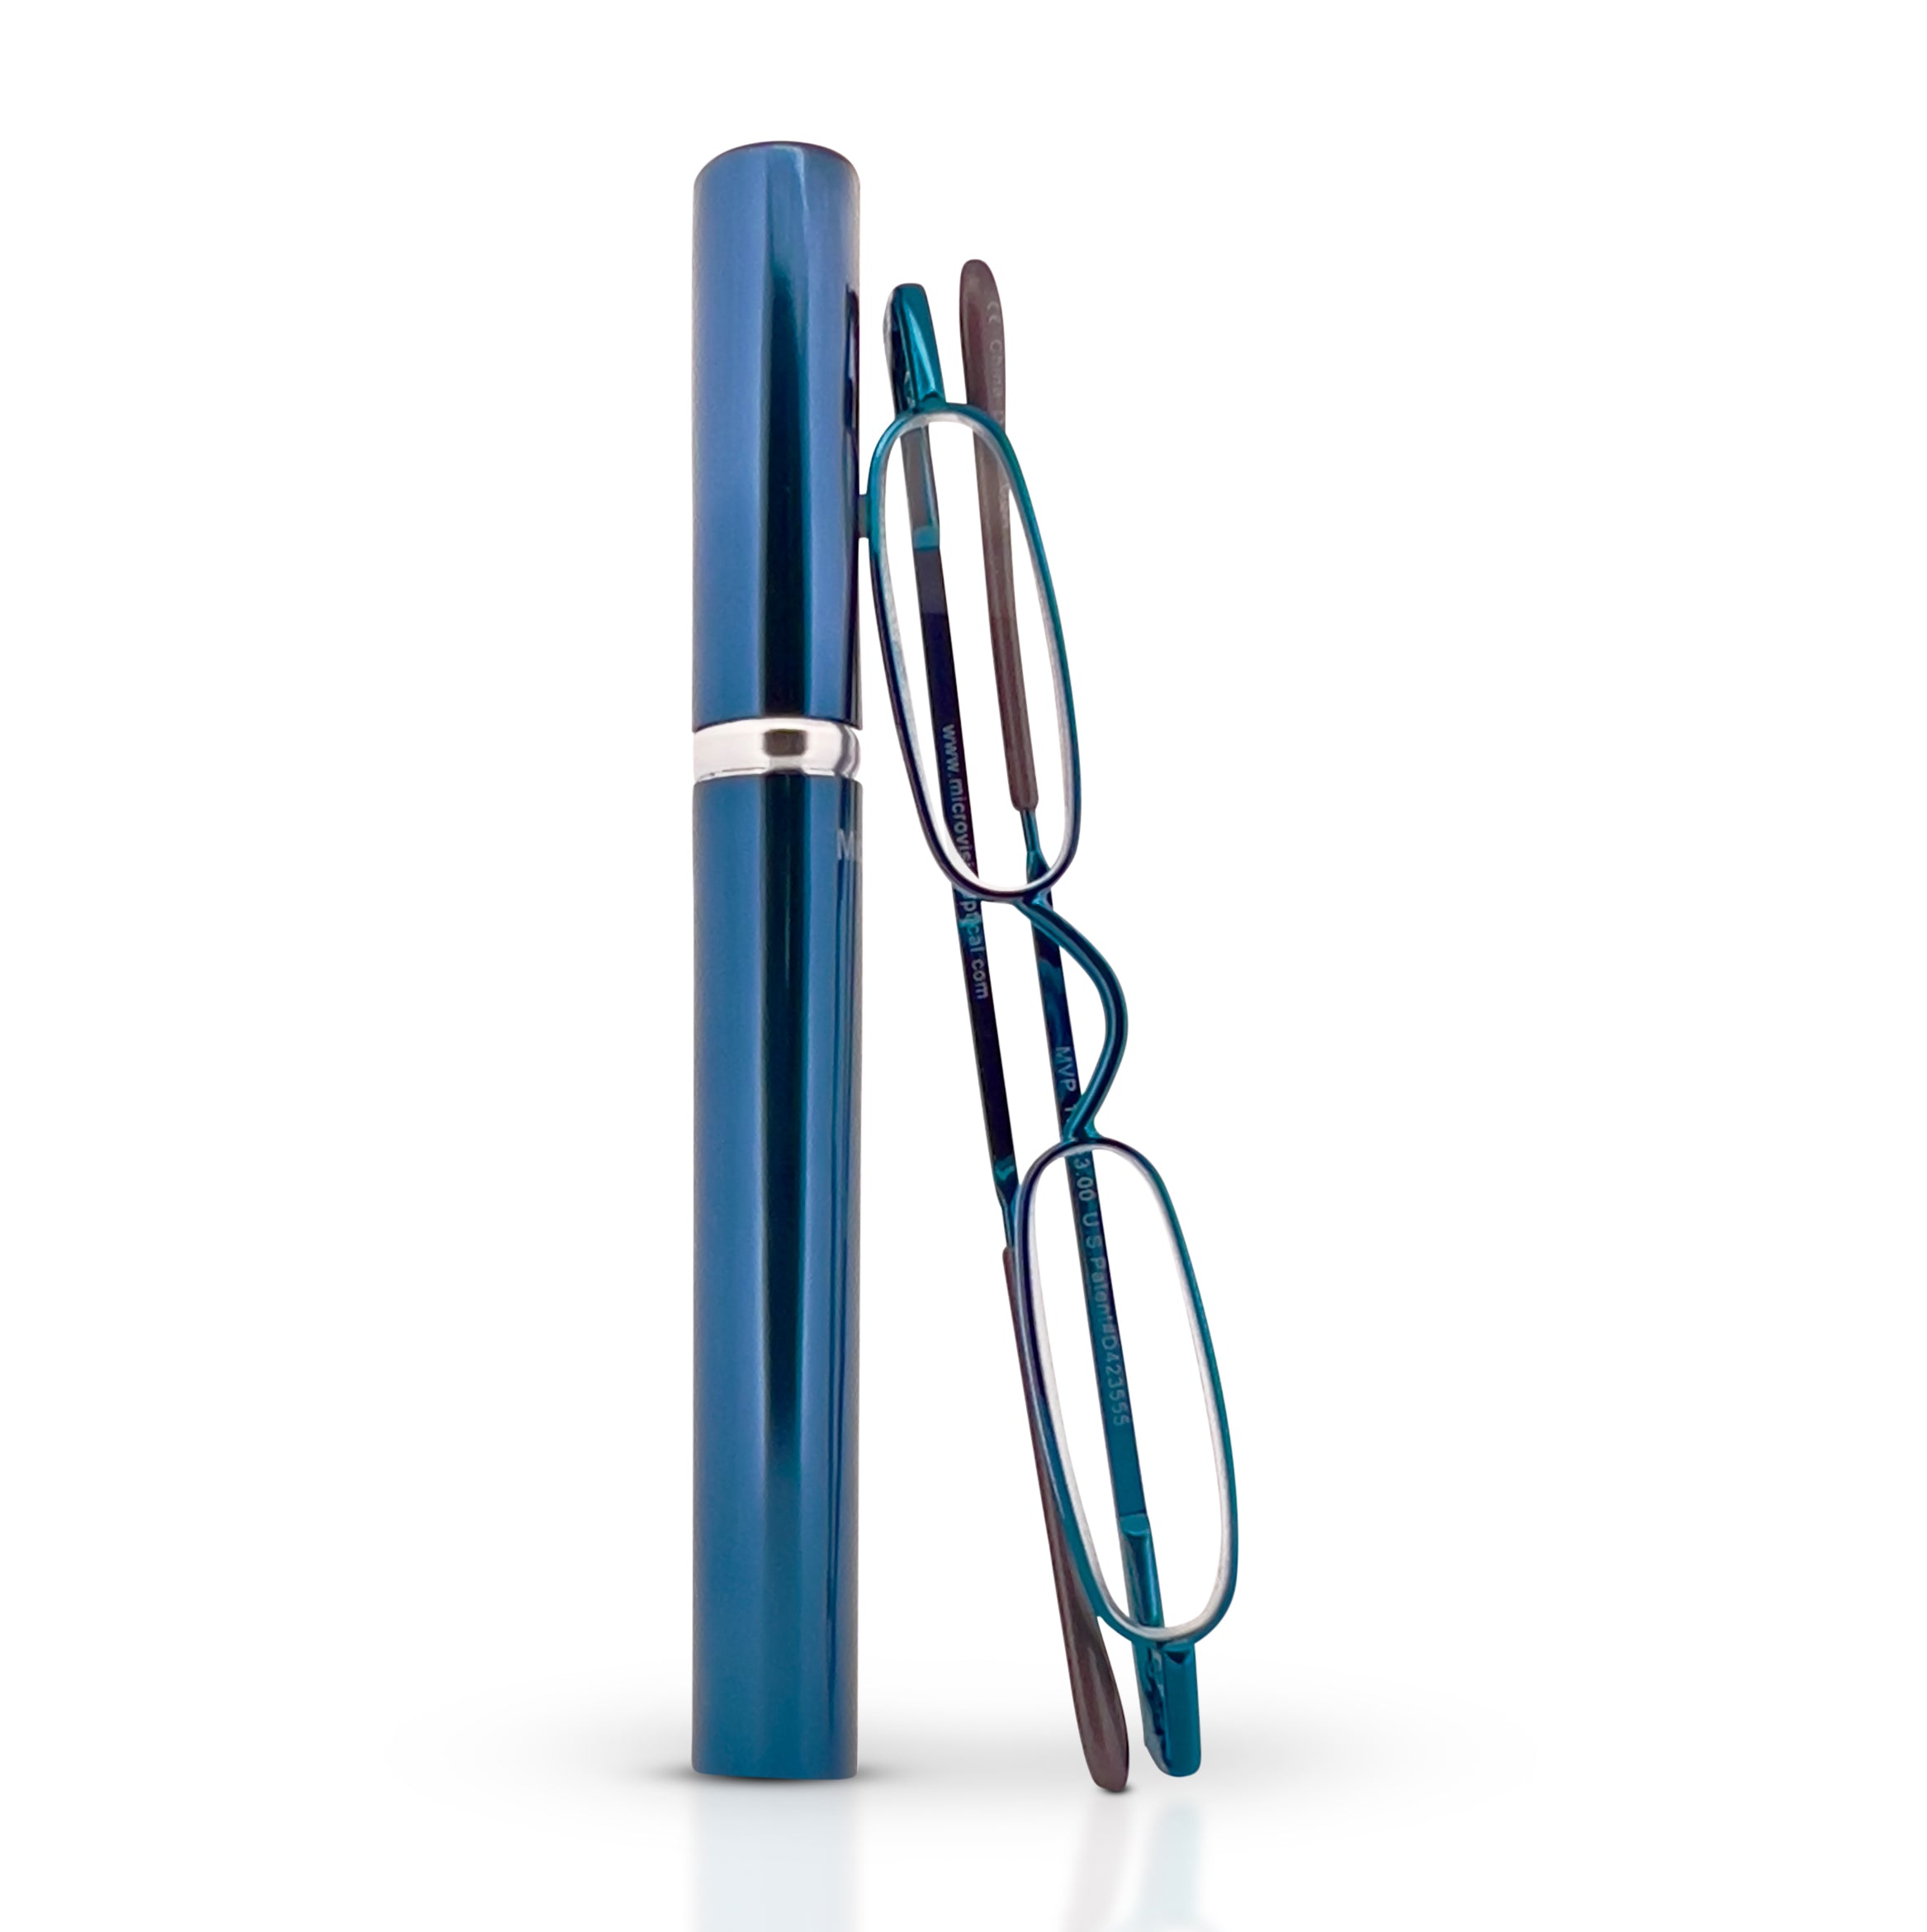 Blue sleek, compact, patented, stainless steel, original mini readers perfect for on the go